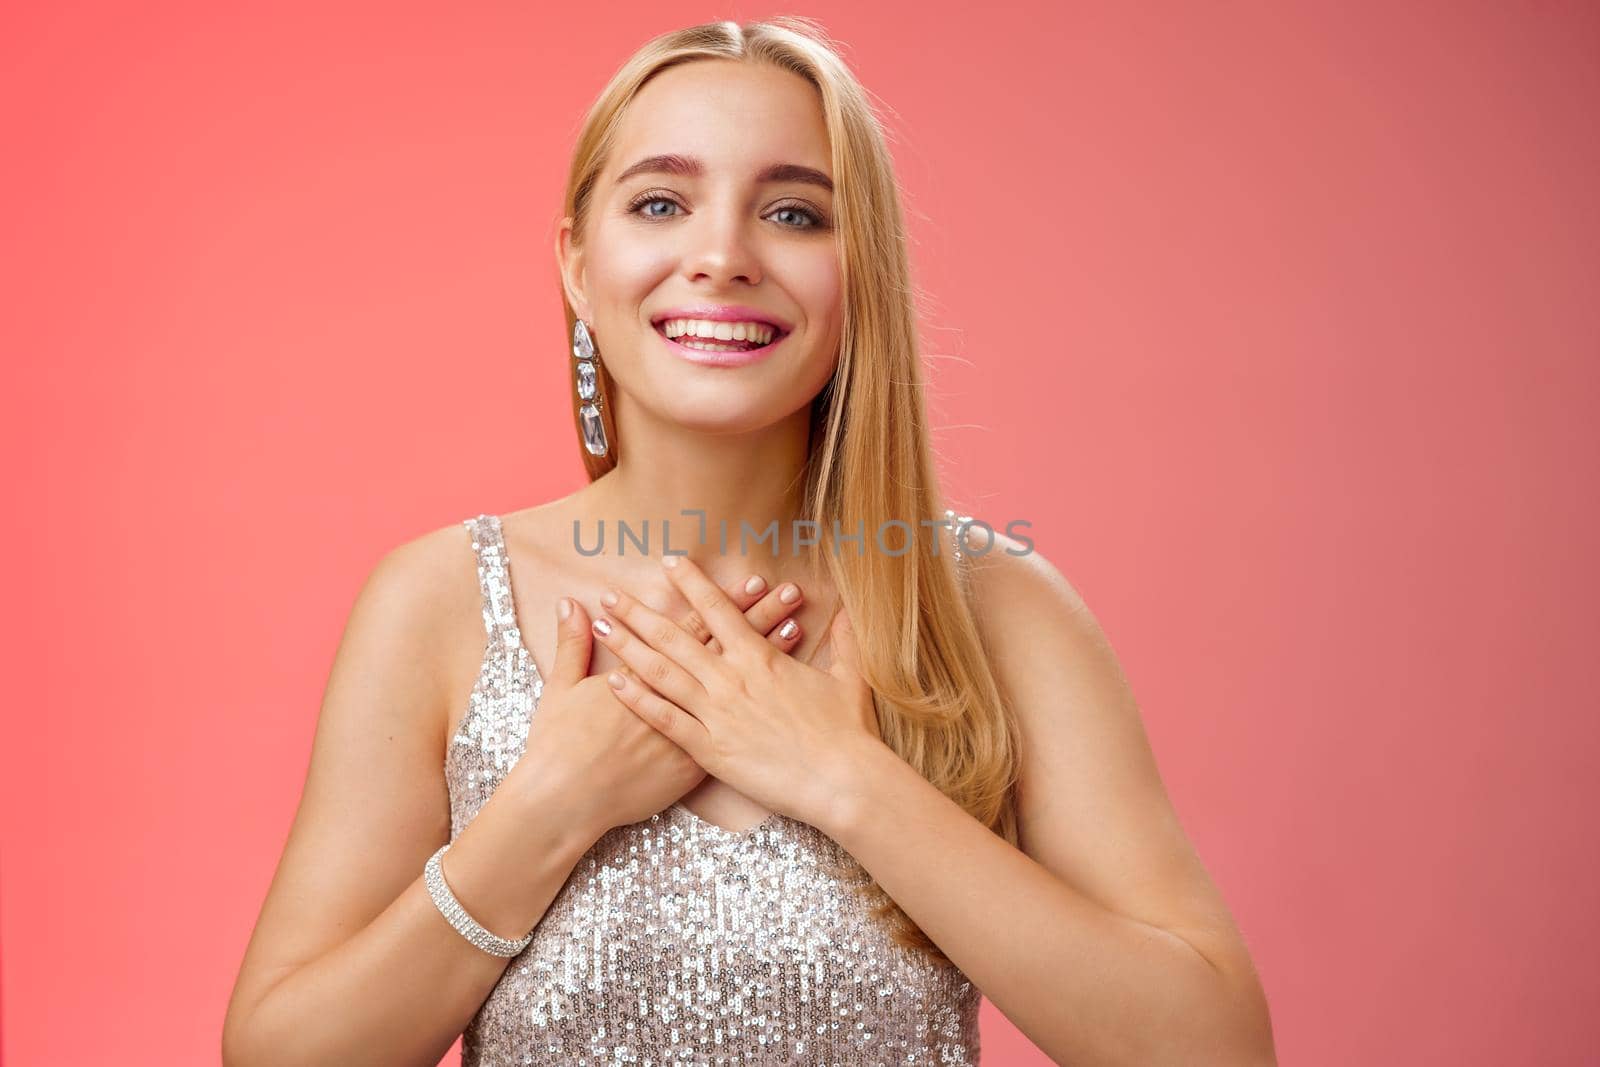 Grateful charming blond european 25s woman in silver party dress press palms heart feel thankful appreciate effort cherish romantic gesture receive flattering compliments gifts, smiling happily.